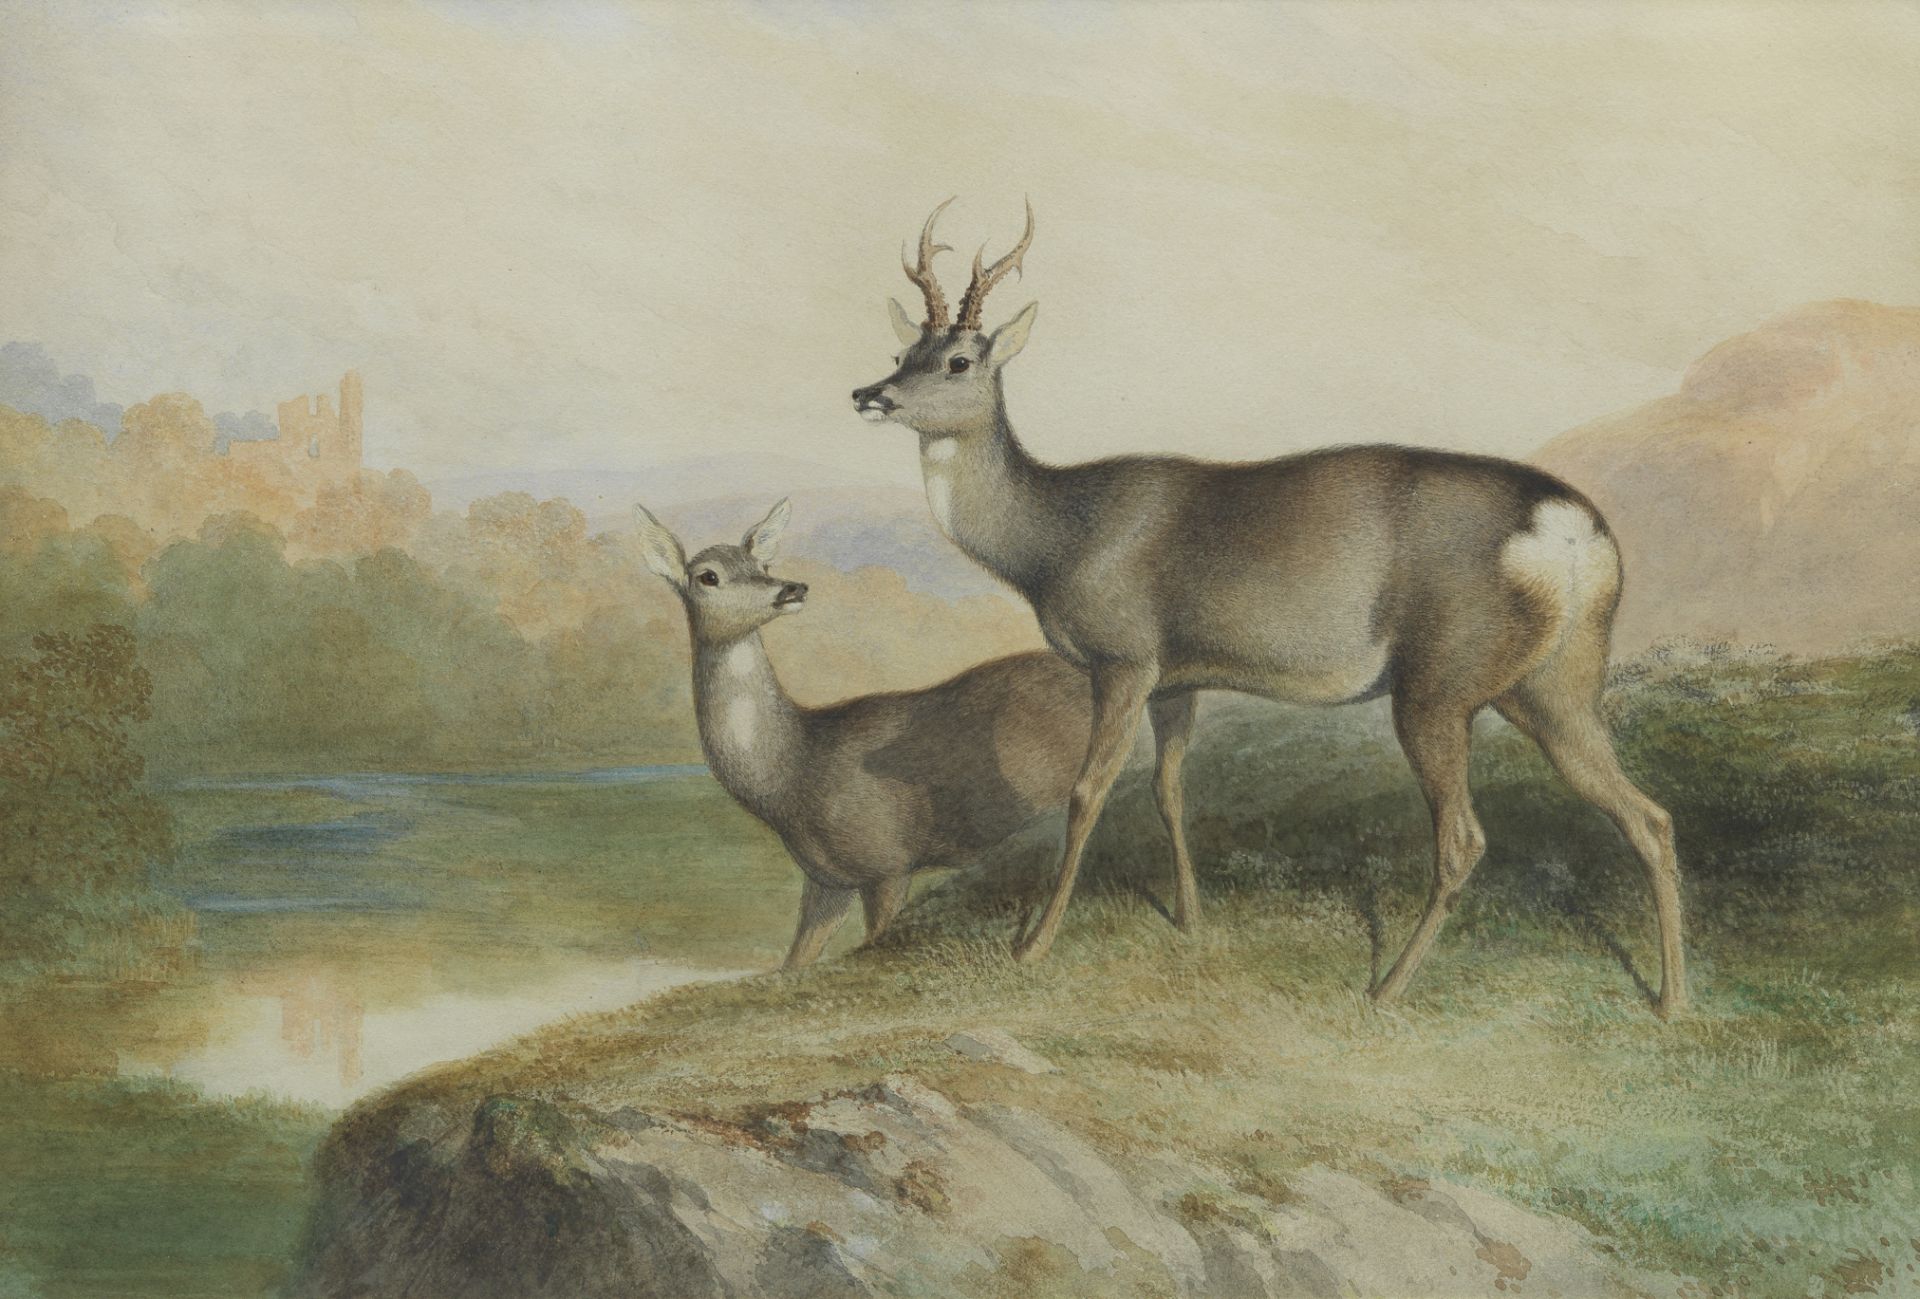 James William Giles (British, 1801-1870) My Heart's in the Highlands - A roe deer buck and hind